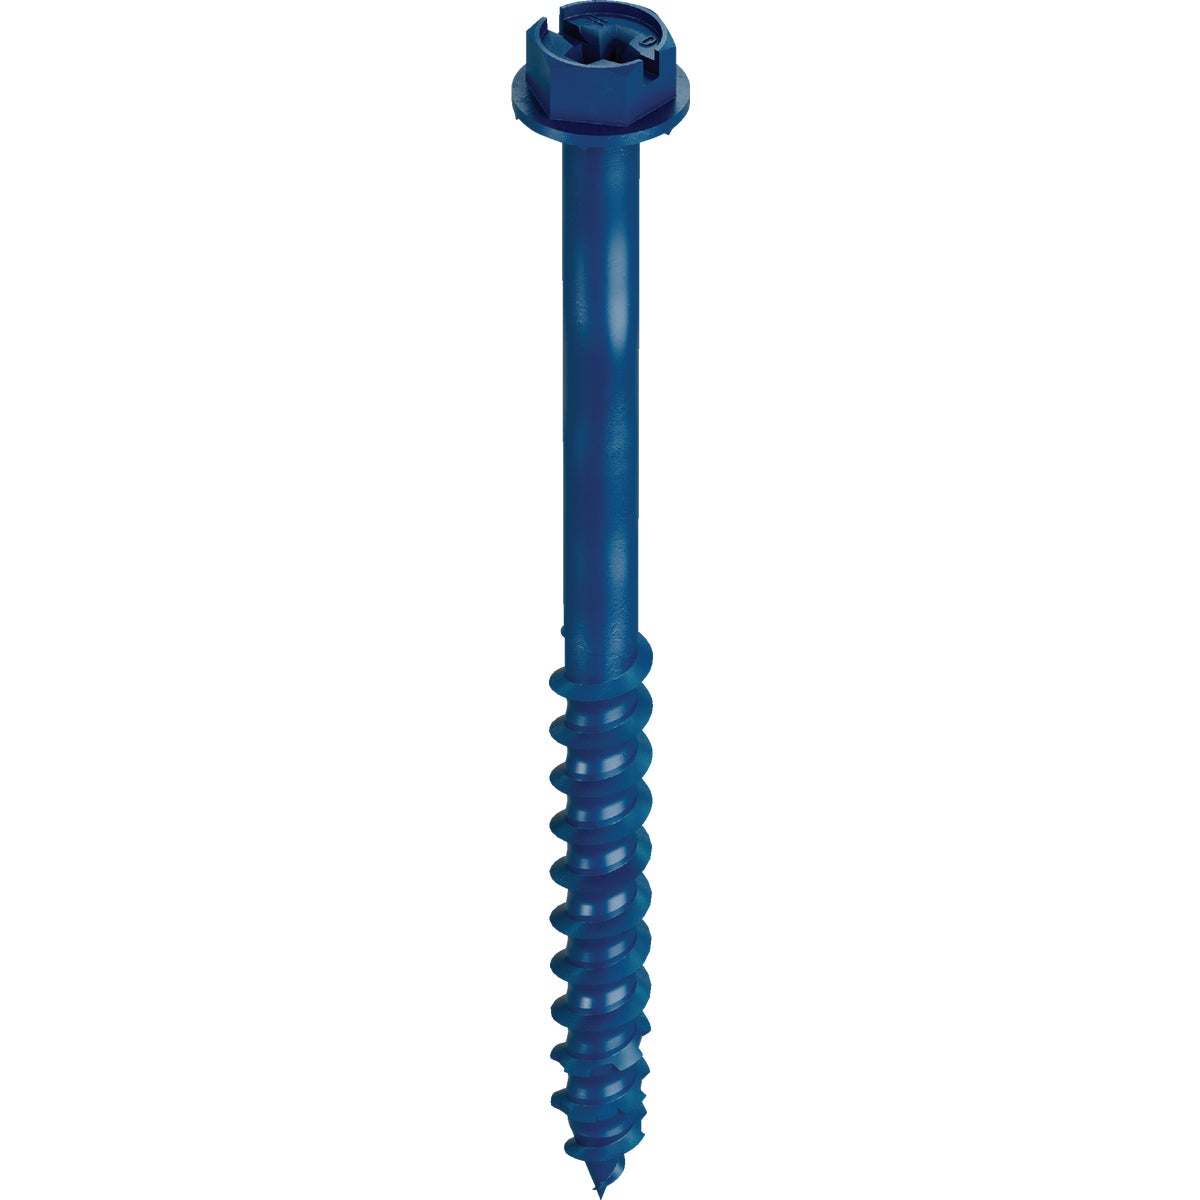 Simpson Strong-Tie Titen Turbo  1/4 in. x 3-1/4 in. Hex-Head Concrete and Masonry Screw, Blue (100-Qty)